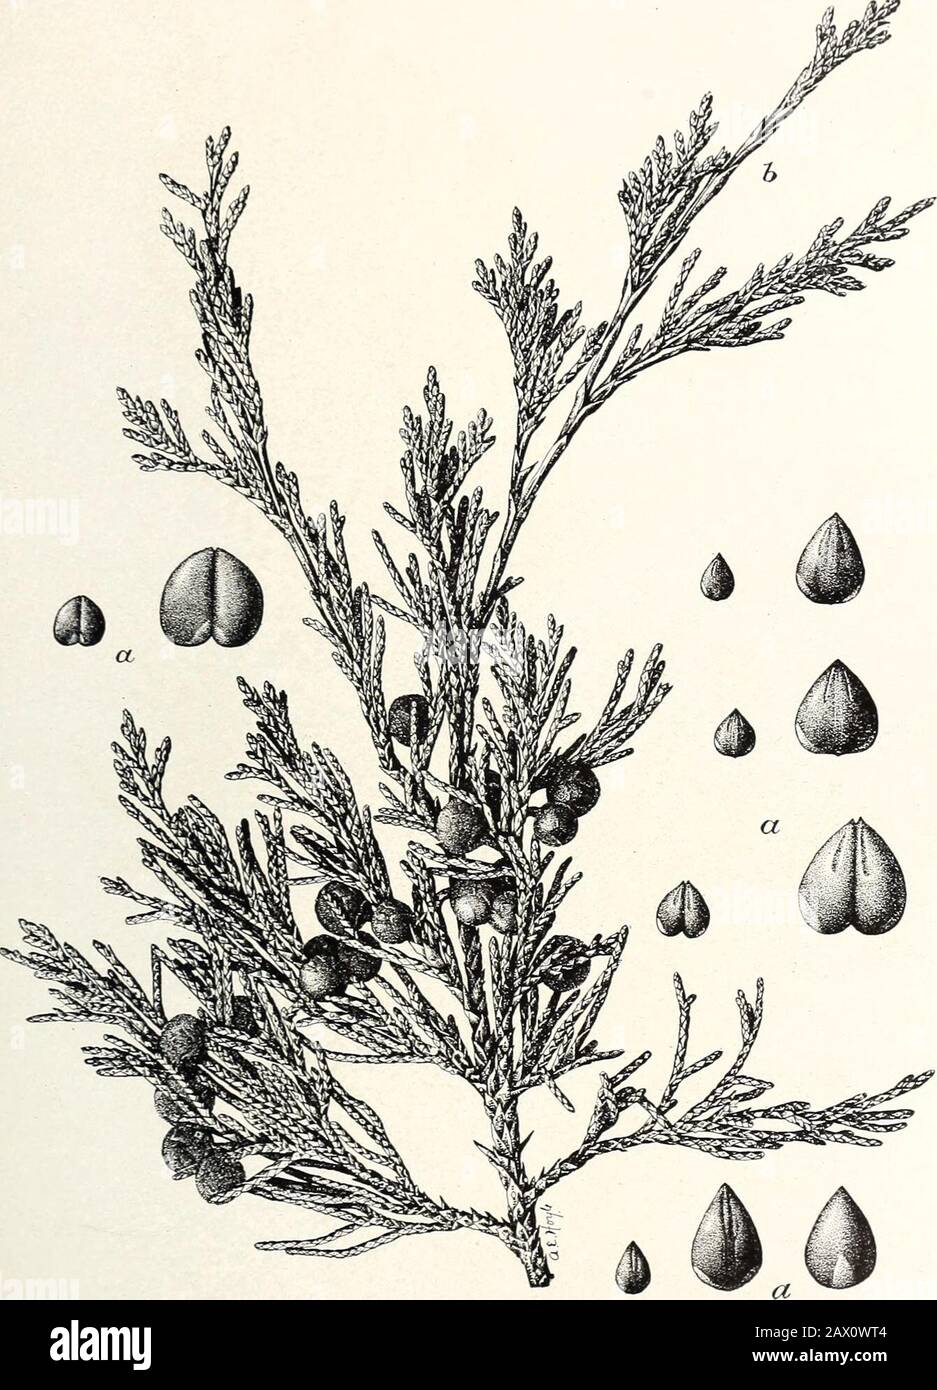 The cypress and juniper trees of the Rocky Mountain region . JUNIPERUS MONOSPERMA: BRANCH SHOWING («) MALE FLOWER BUDS (IN AUTUMN] Bui. 207, U. S. Dept. of Agriculture. Plate XIII.. JUNIPERUS SABINOIDES: FOLIAGE AND RlPE FRUIT.a Variable forms and number of seeds in different berries; b, young shoot with large form of leaves. 5ul. 207, U. S. Dept. of Agriculture. Plate XIV. Stock Photo